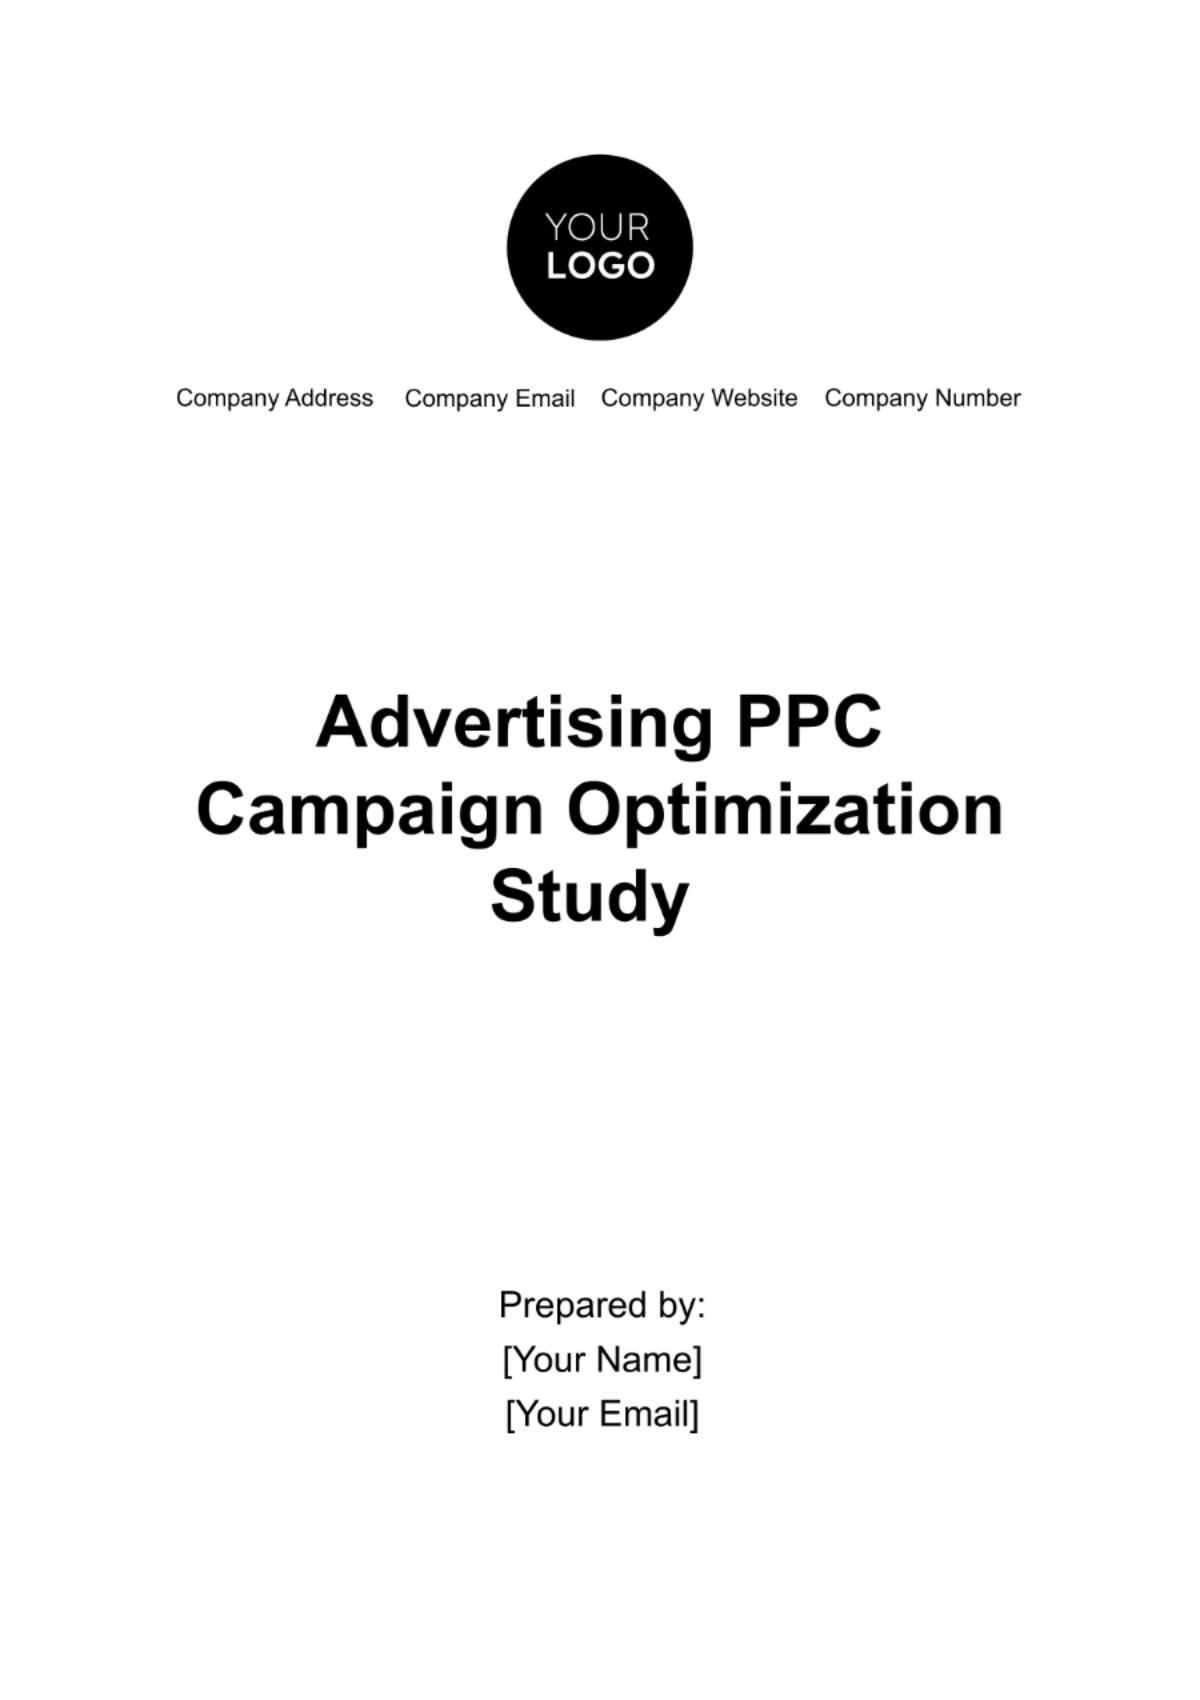 Advertising PPC Campaign Optimization Study Template